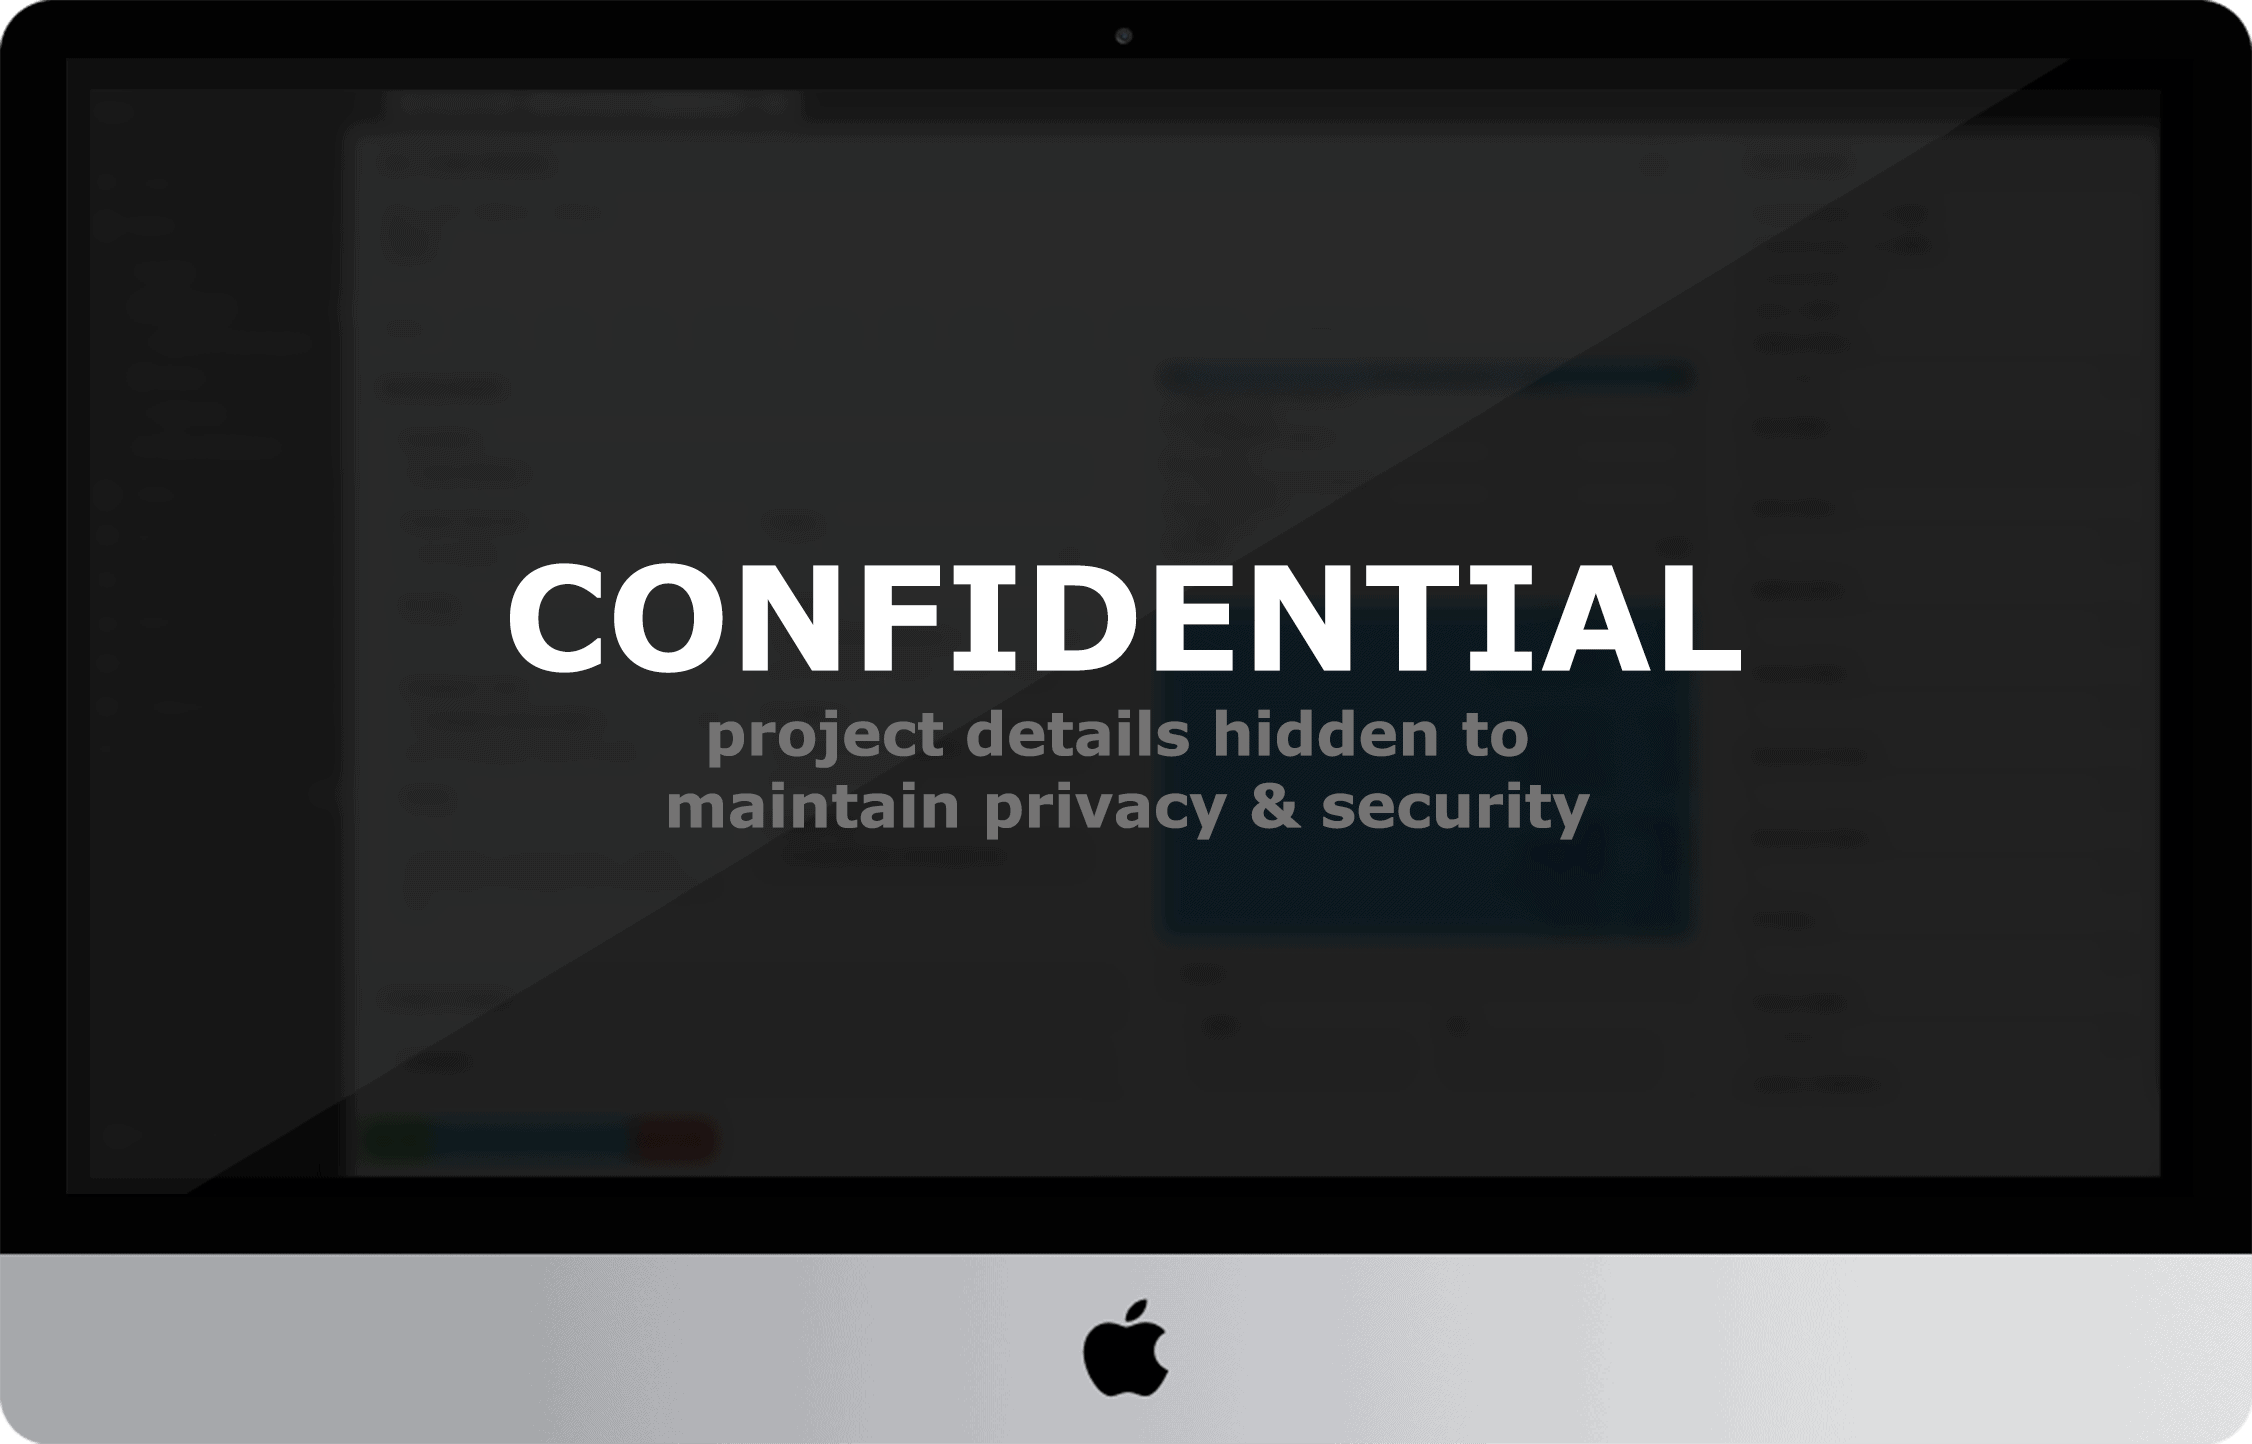 Confidential - project details hidden to maintain privacy and security